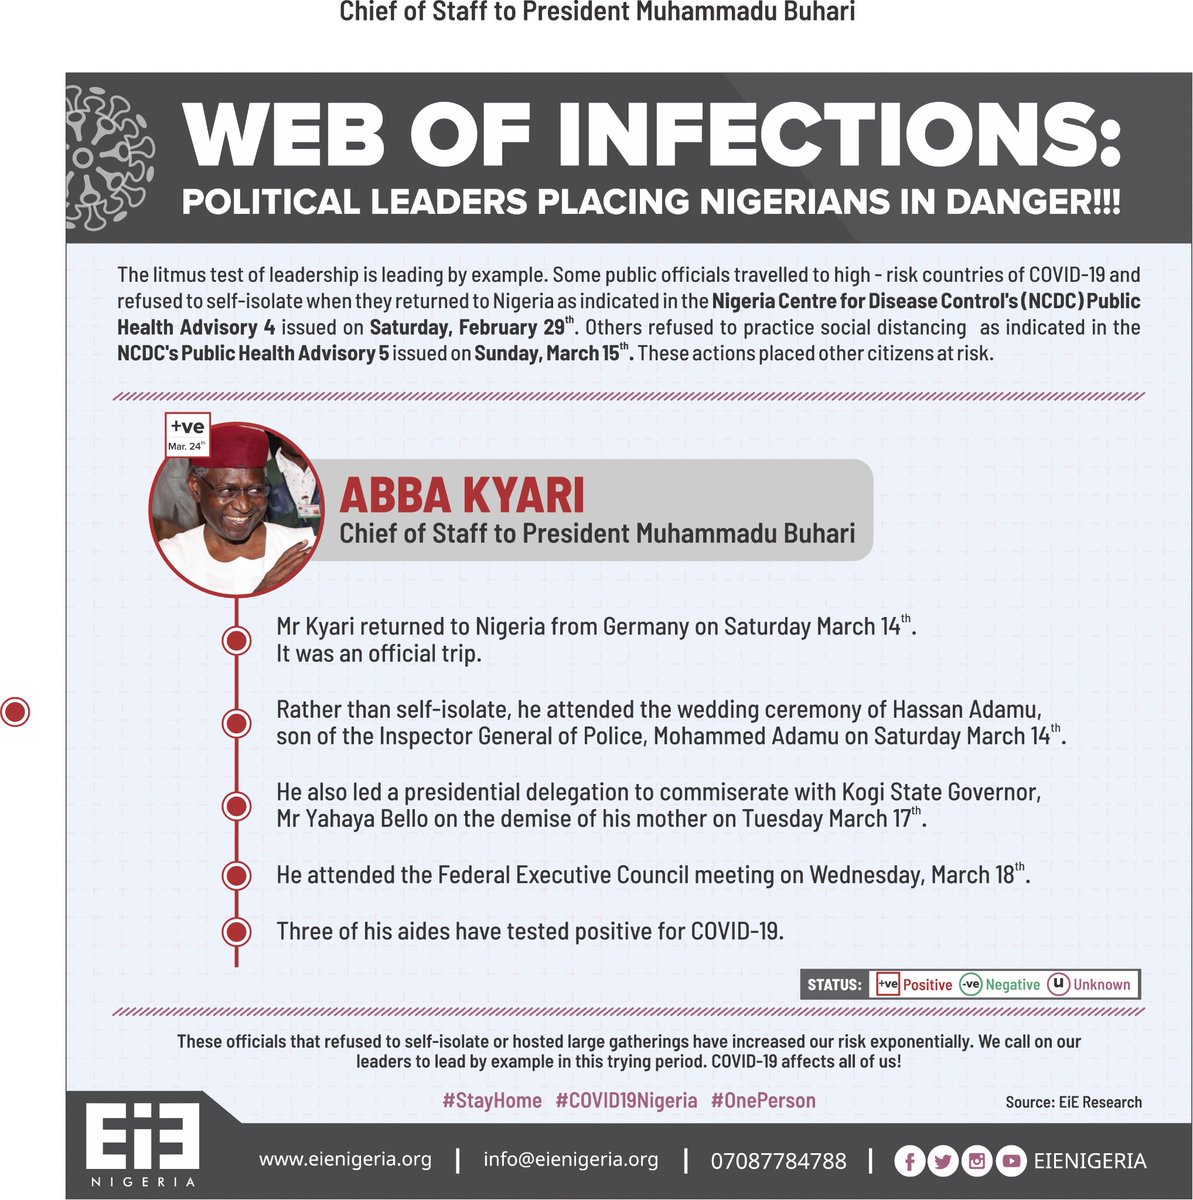 How political leaders’ recklessness endangers Nigerians.Abba Kyari- Returned to Nigeria from Germany on March 14th, passing through the UK & Egypt.- Didn't follow guidelines by  @NCDCgov to self-isolate, thus endangering everyone that came in contact with him. #COVID19NIGERIA